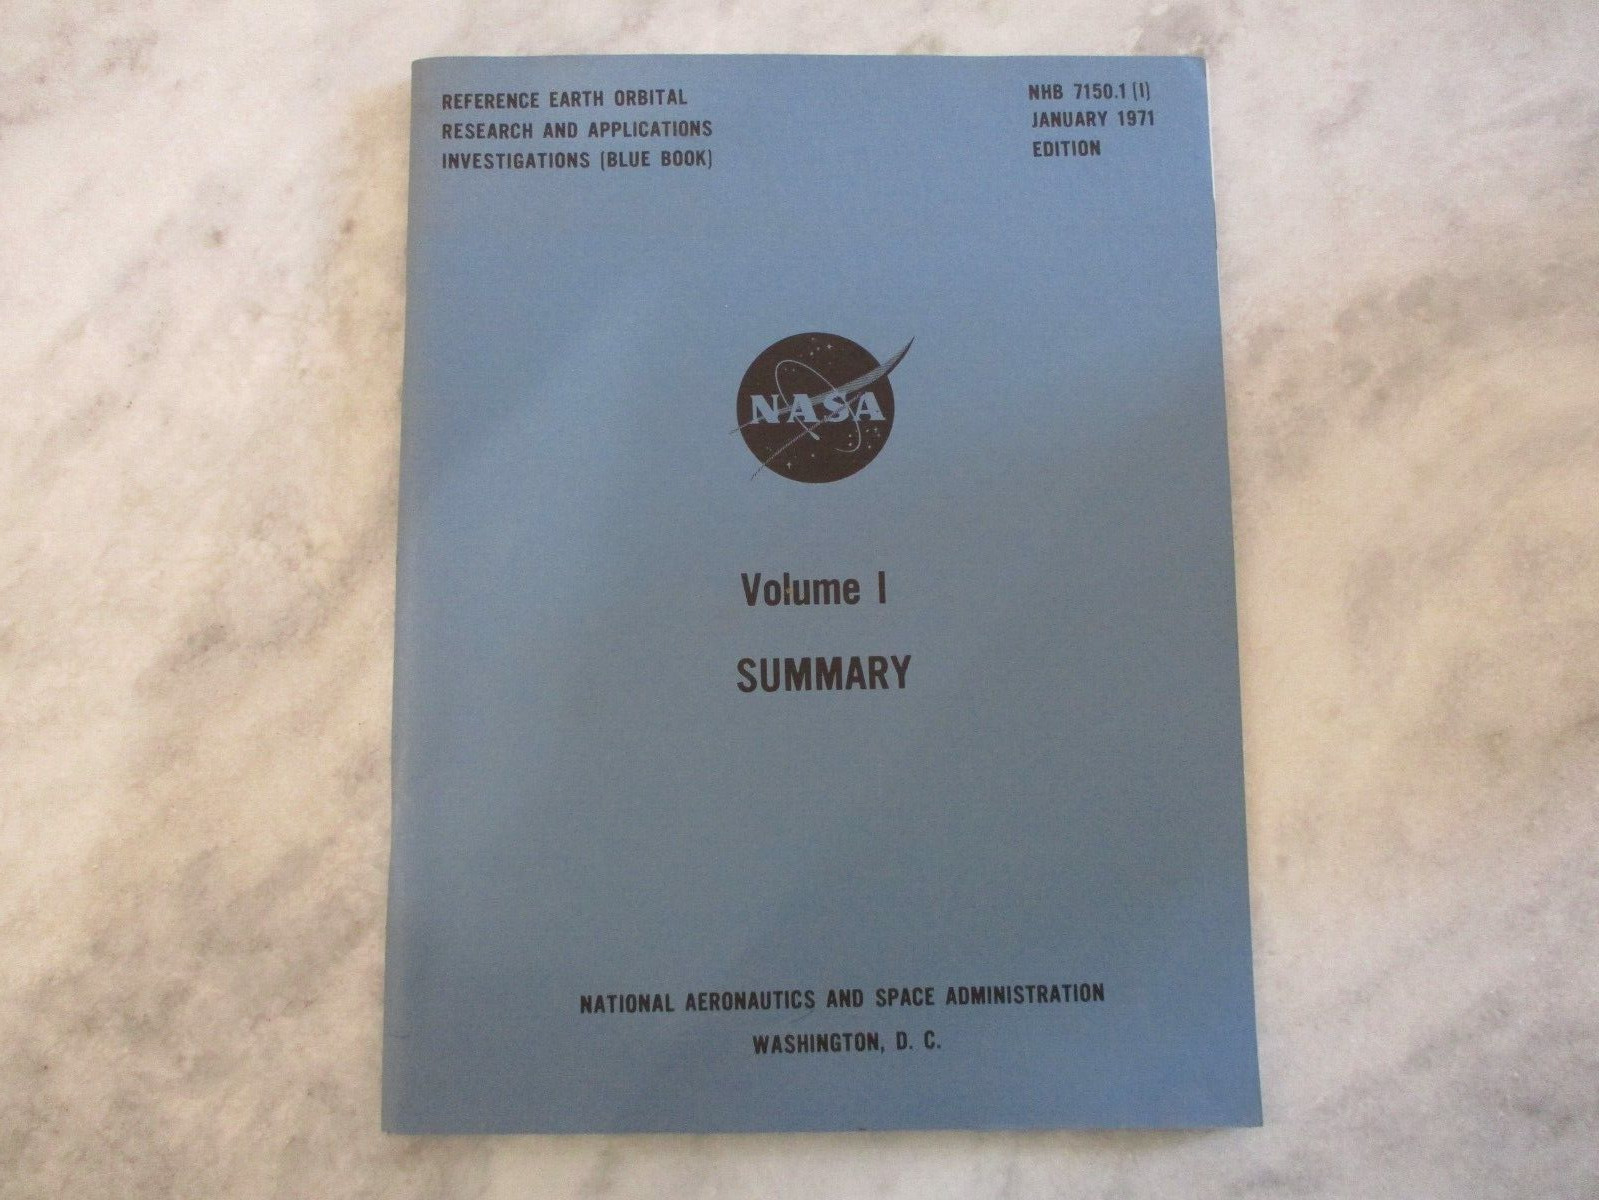 NASA SPACE SHUTTLE/STATION 1971 EARLY DEVELOPMENT INVESTIGATIONS-BLUE BOOK VOL 1